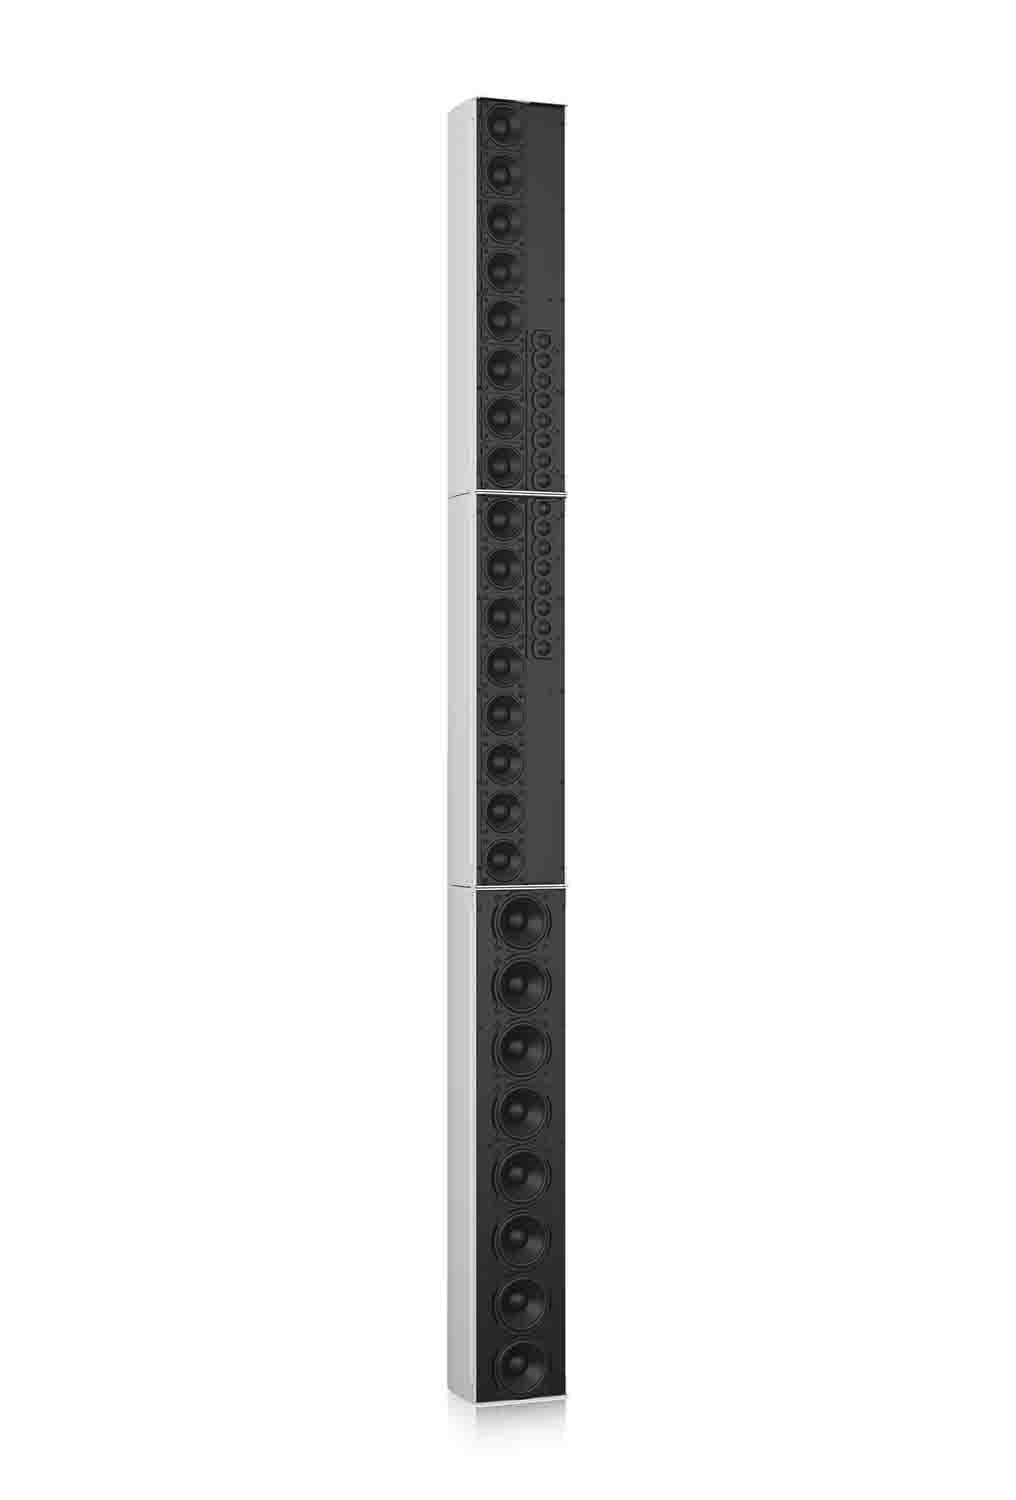 Tannoy QFLEX 40 Digitally Steerable Powered Column Array Loudspeaker with 40 Independently Controlled Drivers - Hollywood DJ